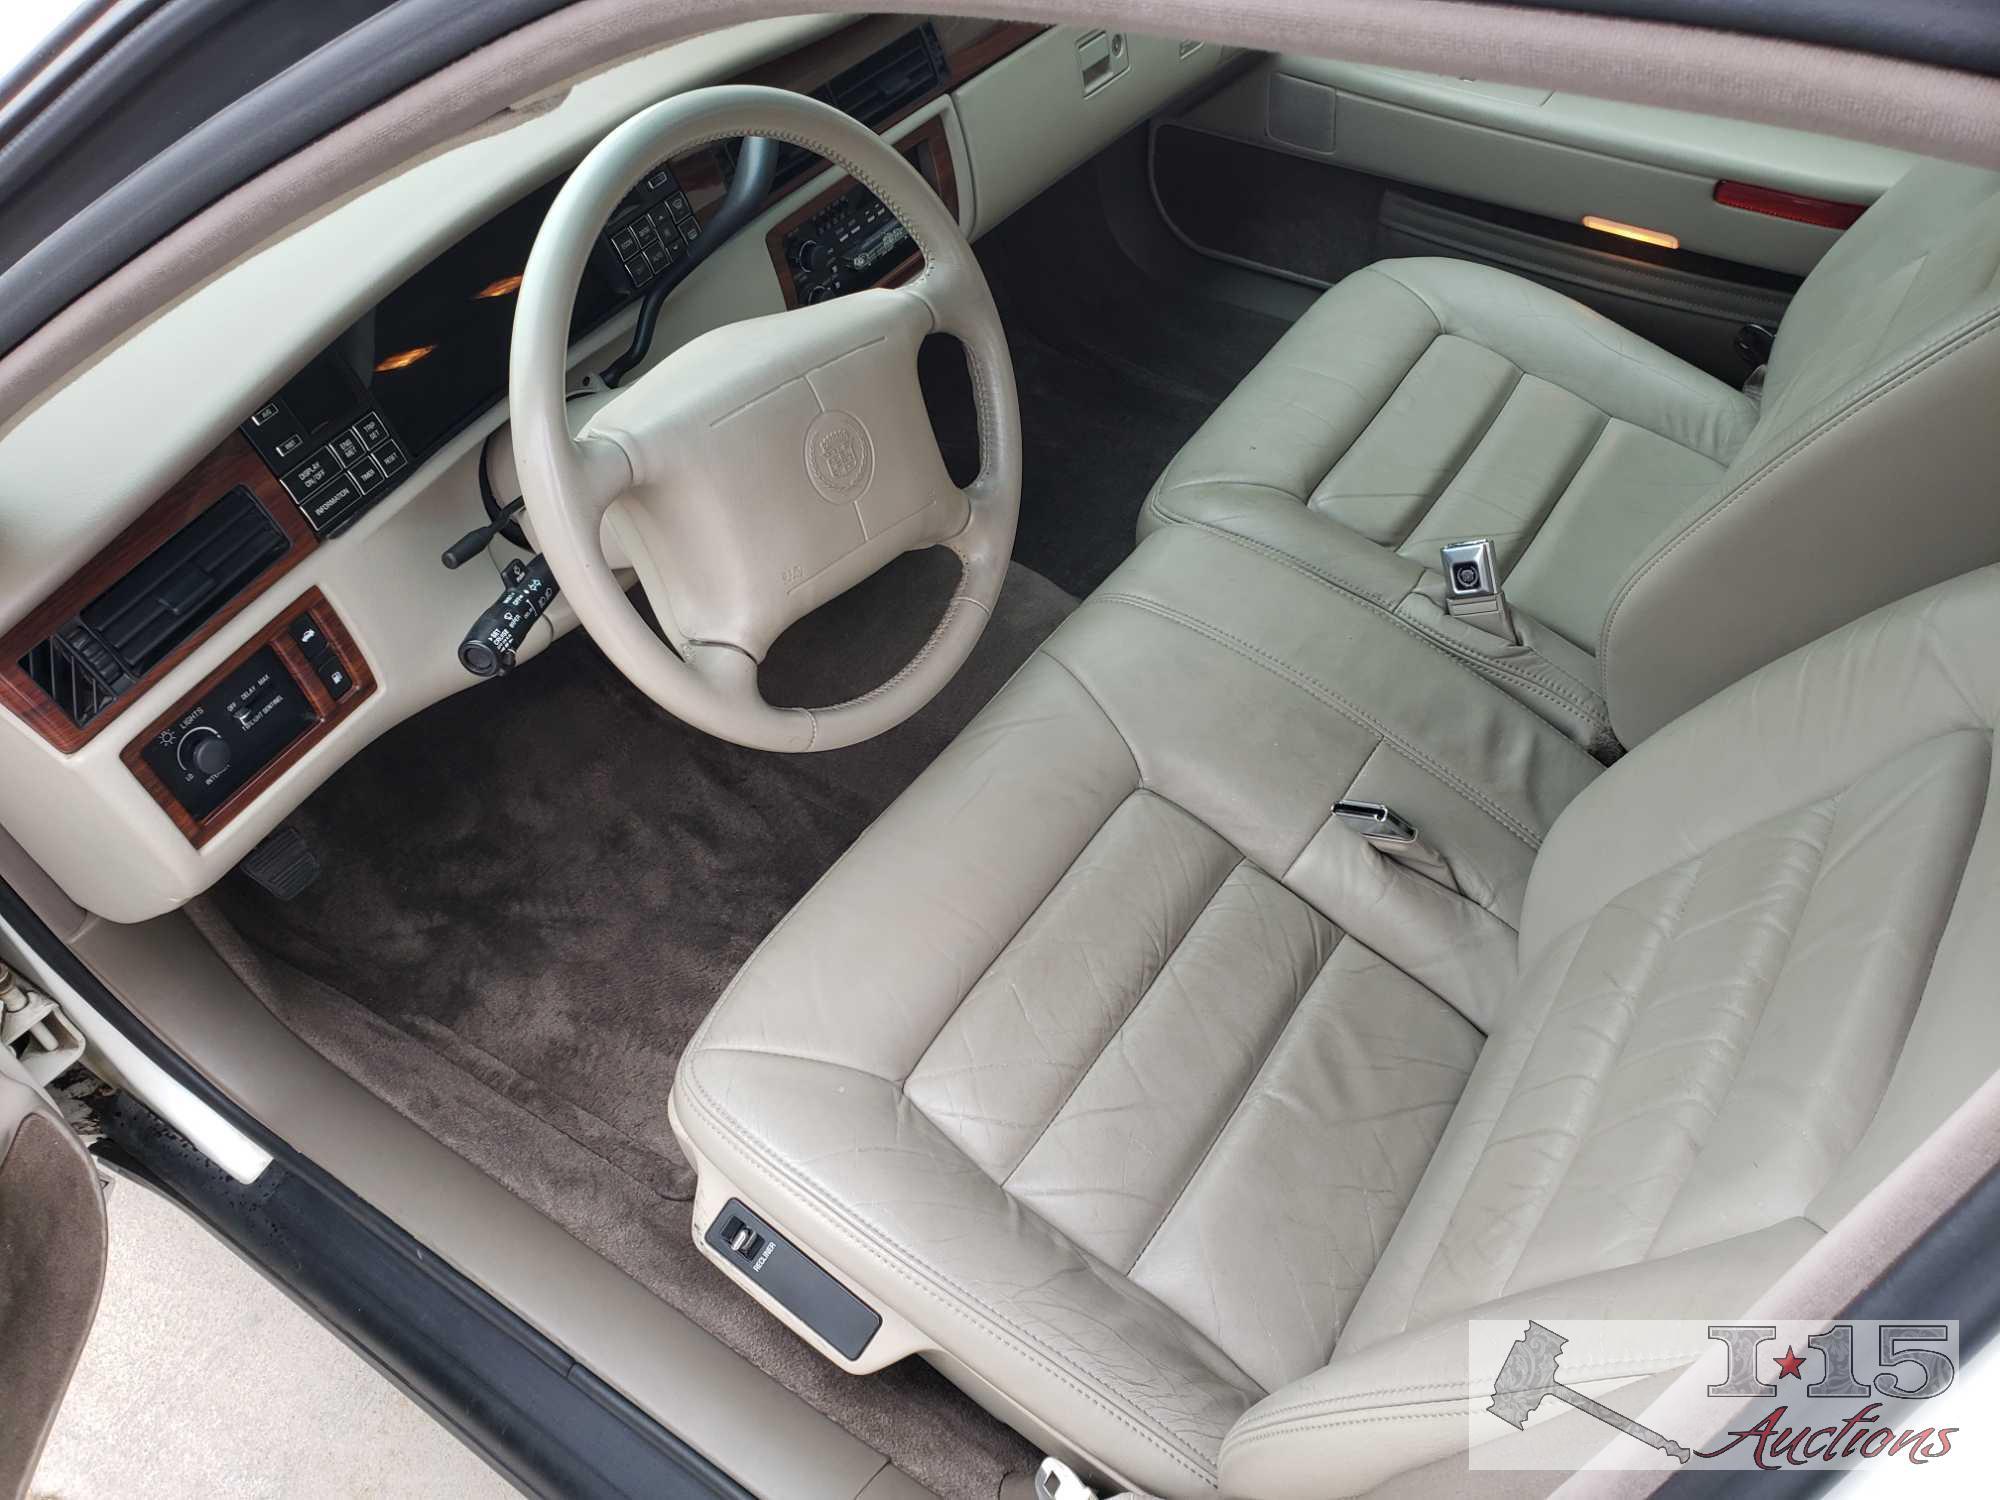 1995 Cadillac Deville White, Low Miles! CURRENT SMOG!! See Video!